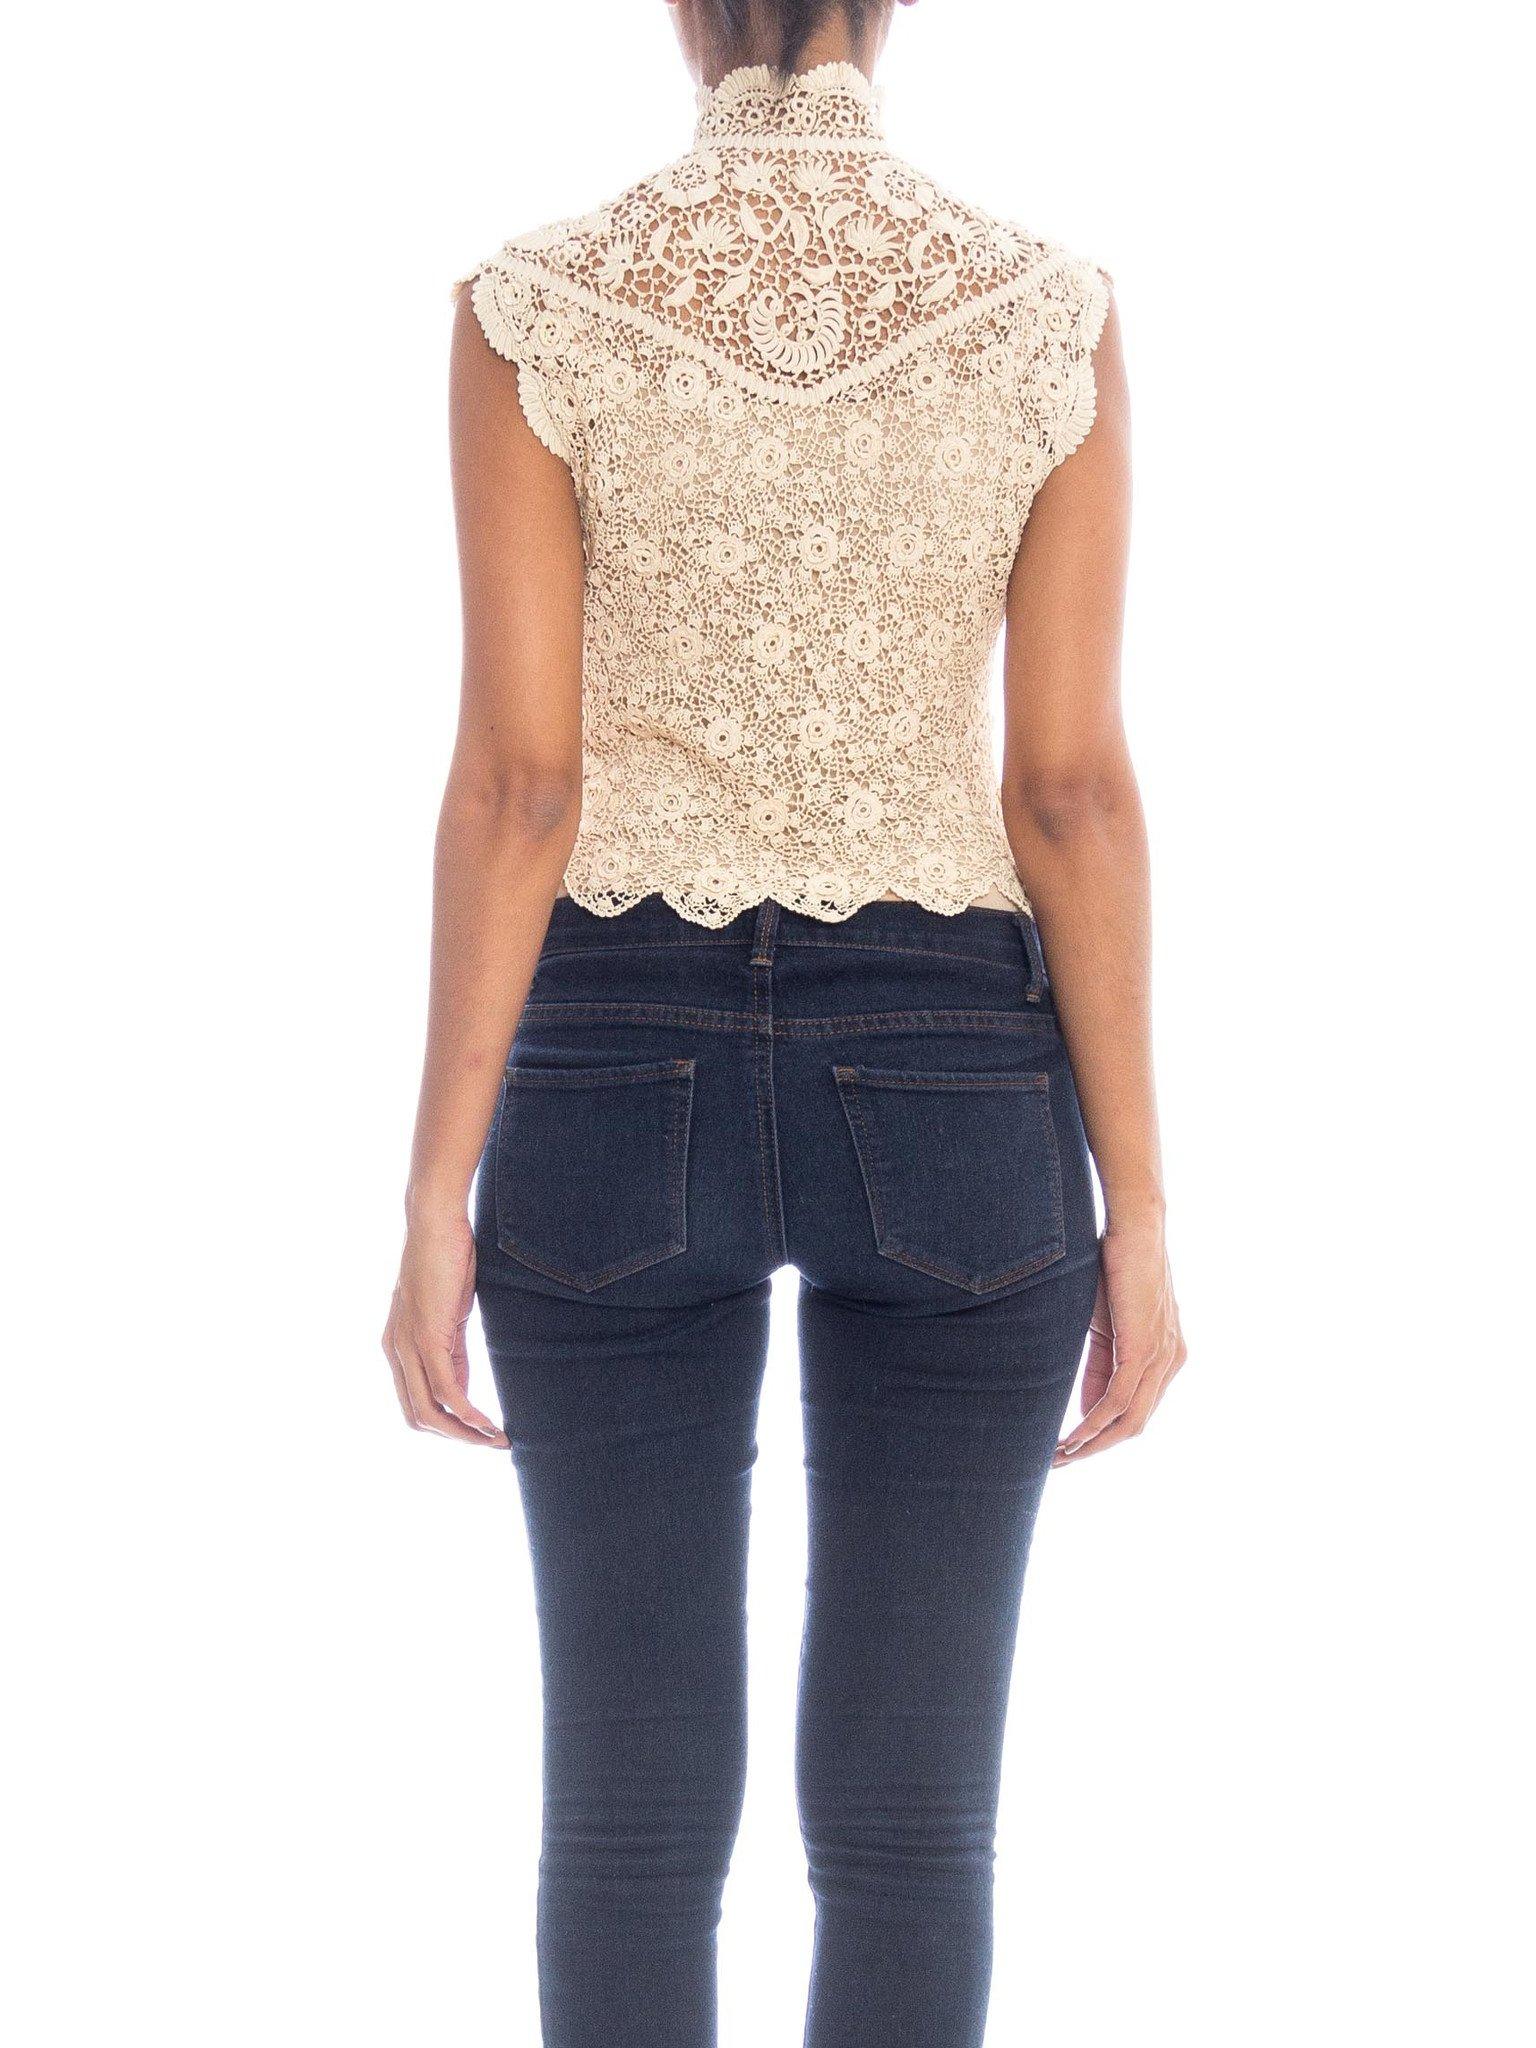 1890S Lace Victorian Irish Crochet Top In Excellent Condition For Sale In New York, NY